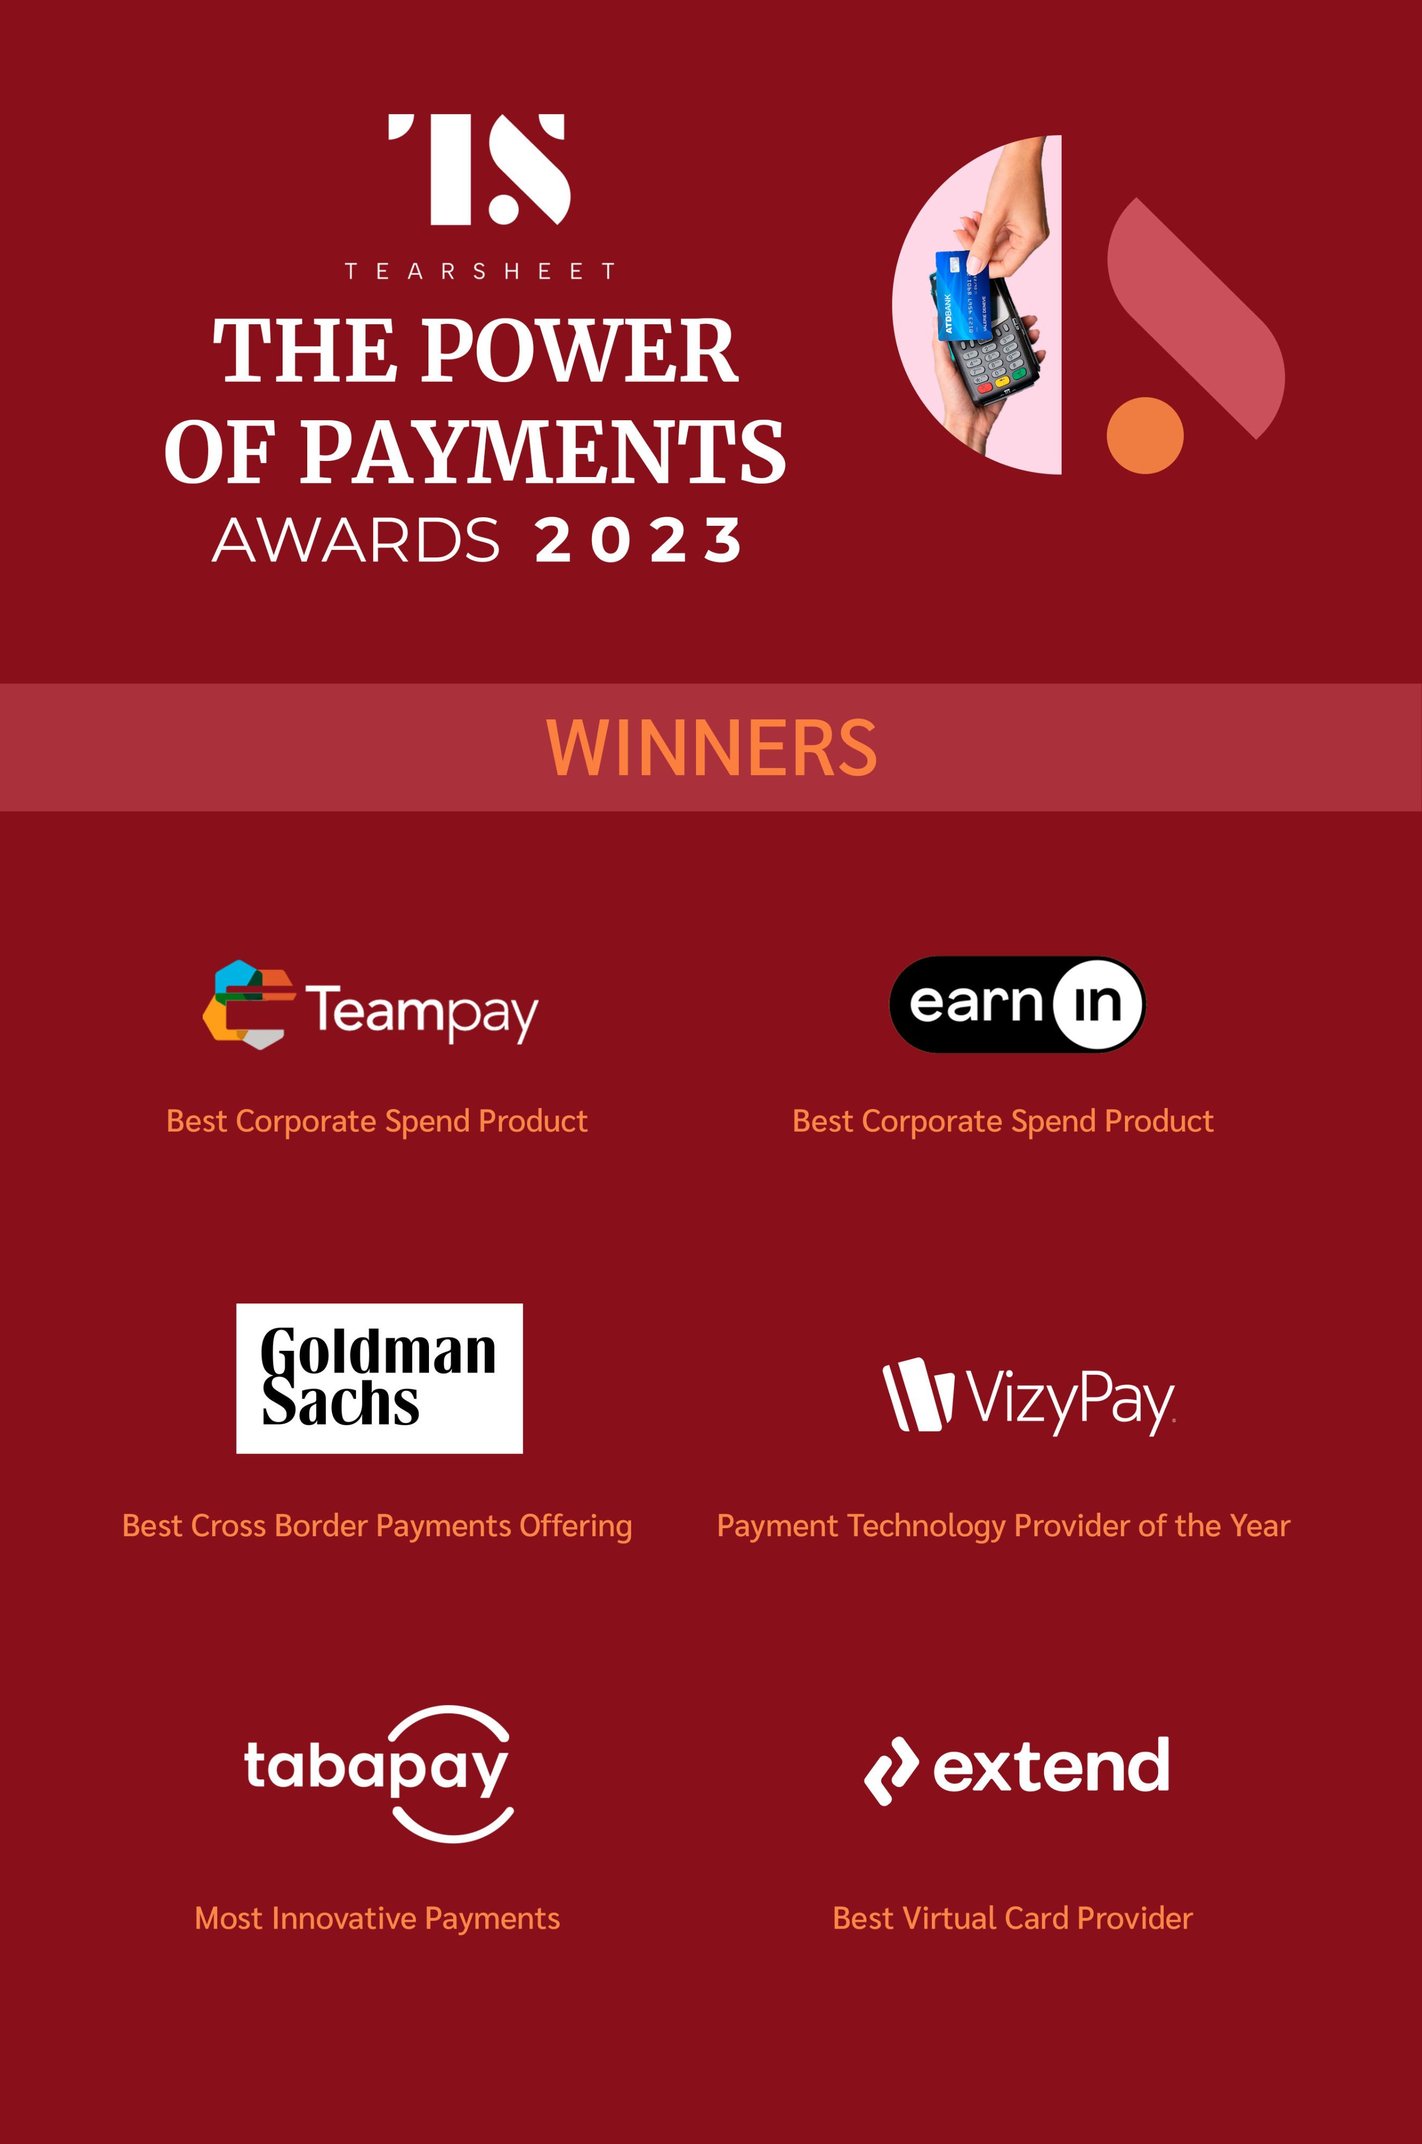 past winners of Tearsheet's The Power of Payments Awards